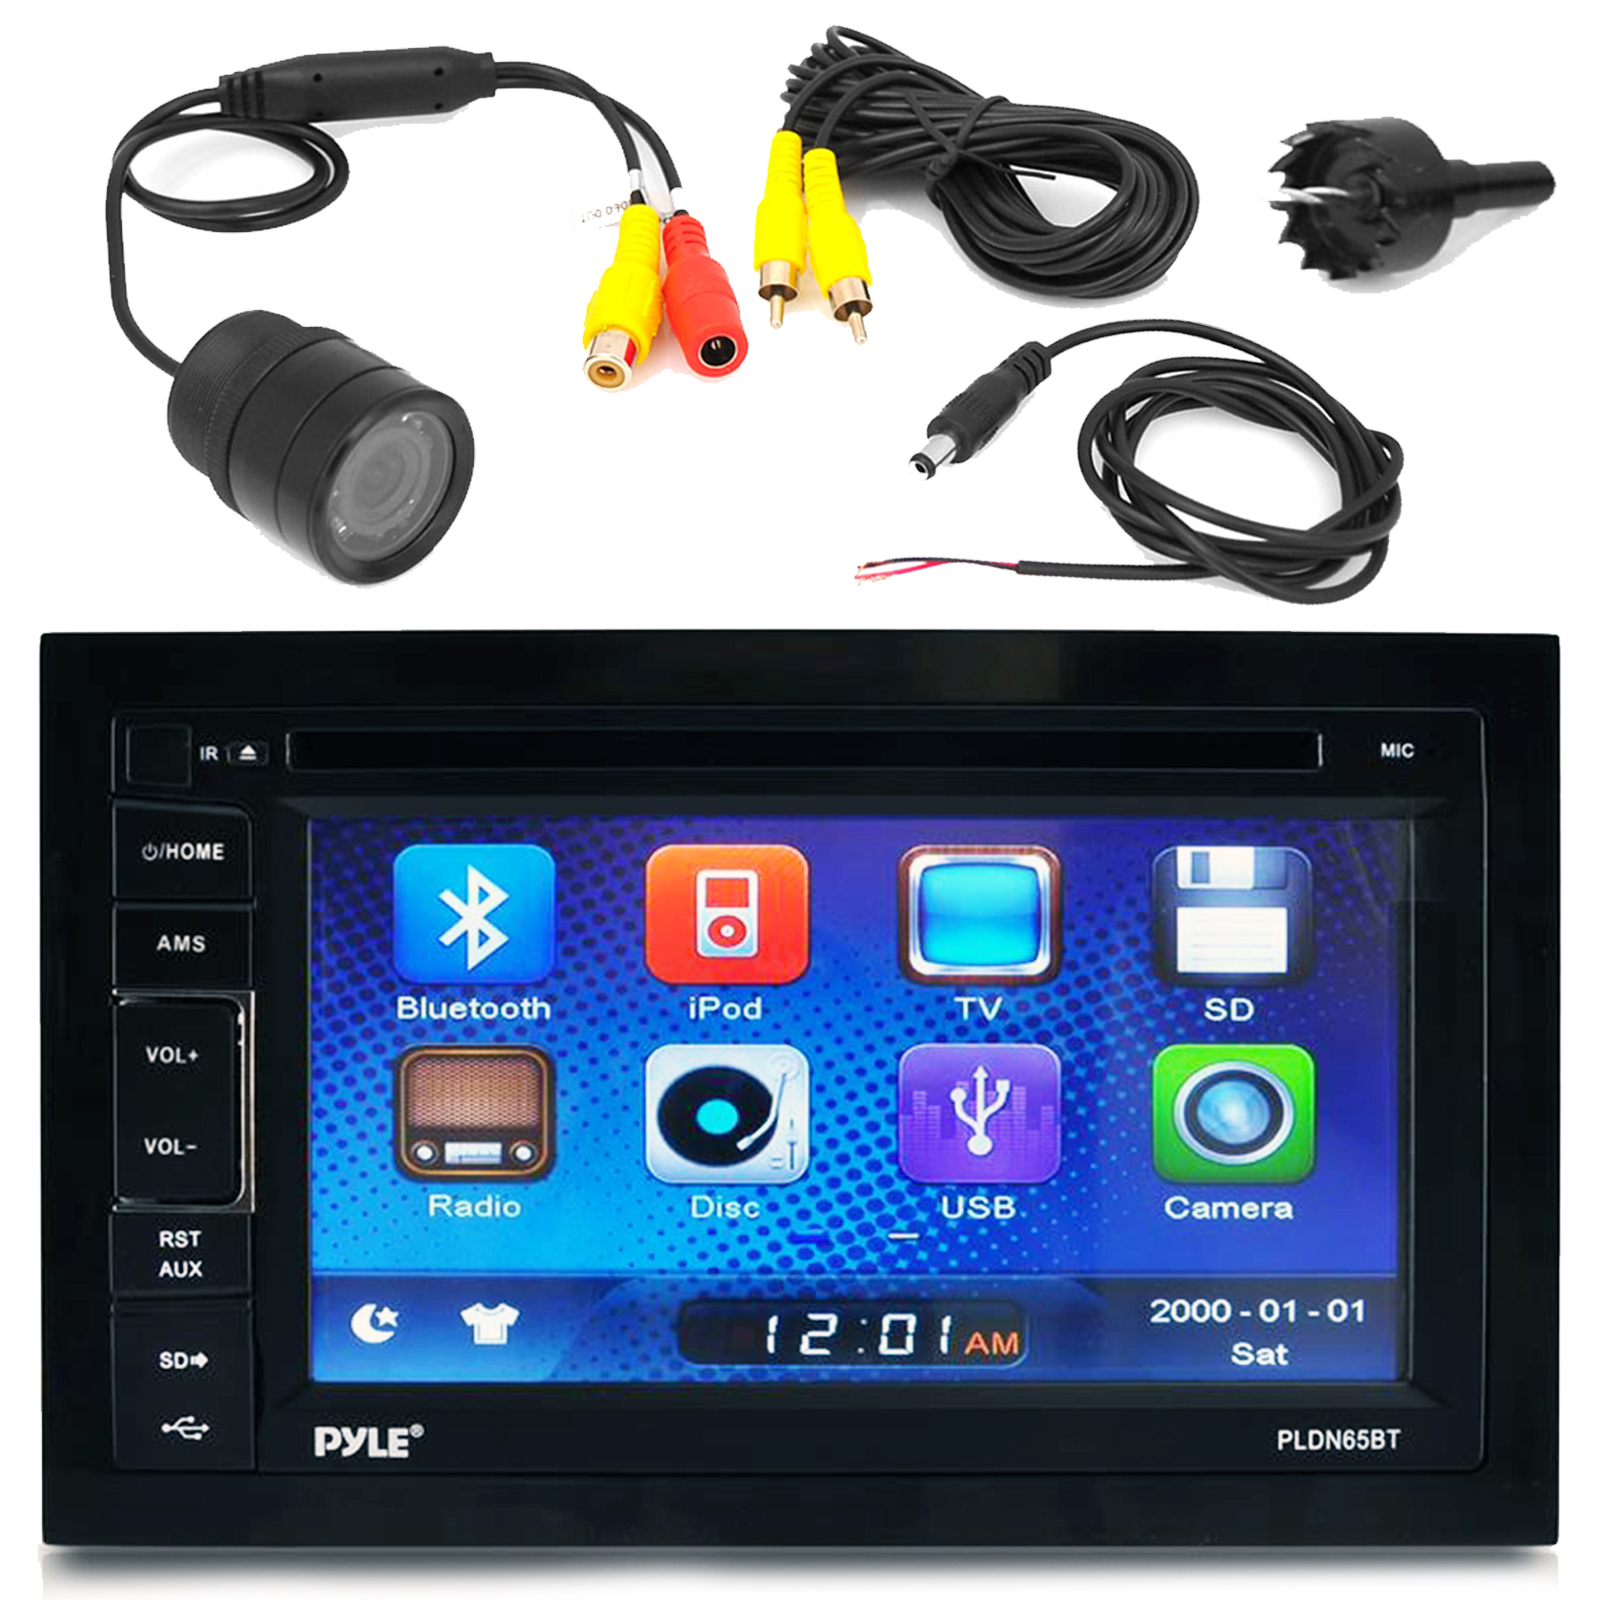 Pyle 6.5" Touch Screen Display Car CD DVD Bluetooth Stereo Receiver Bundle Combo With PLCM22IR Flush Mount Rear View Colored Backup Camera - Walmart.com